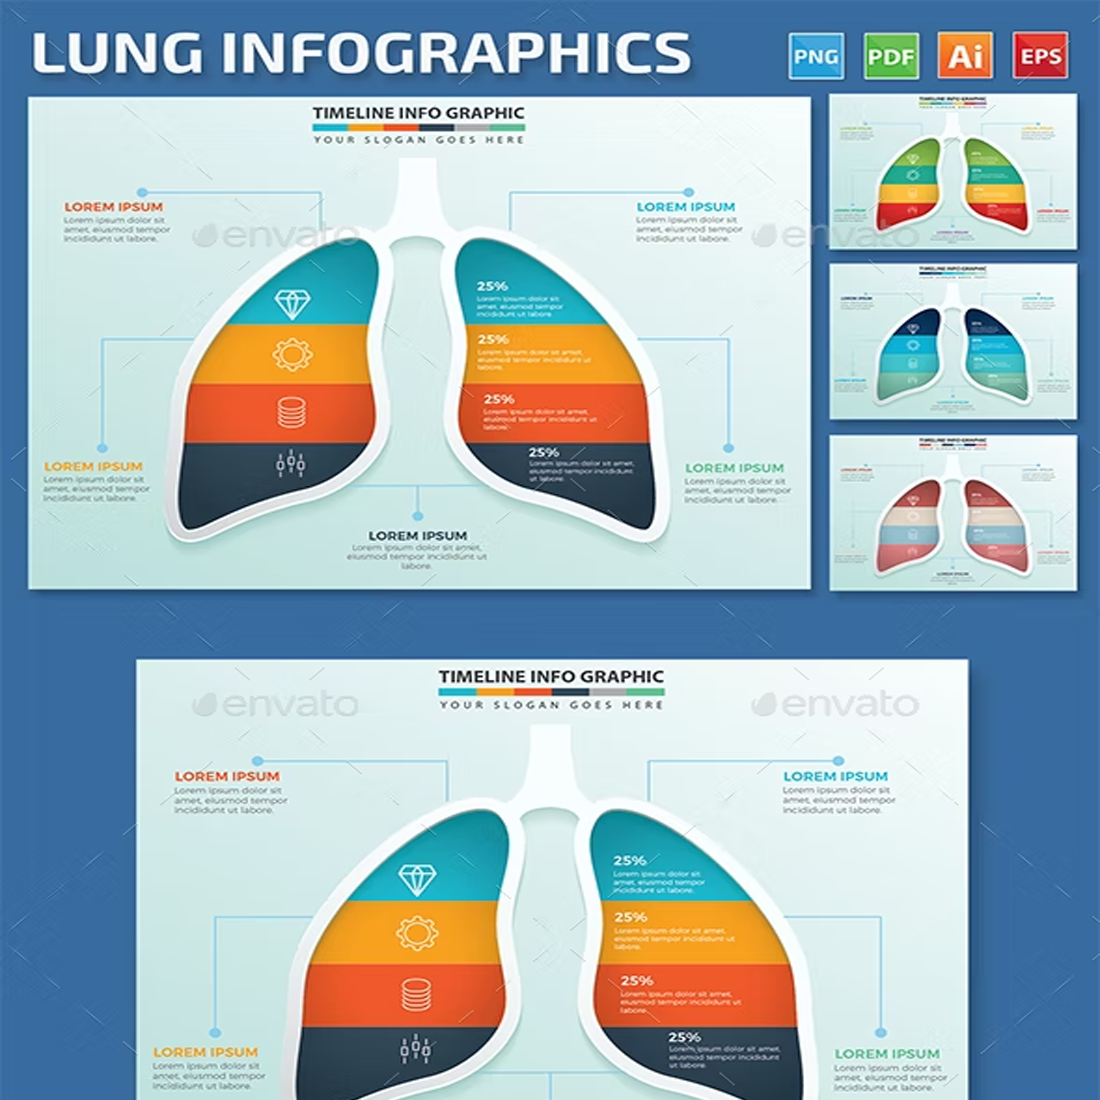 Images preview lung infographics design.